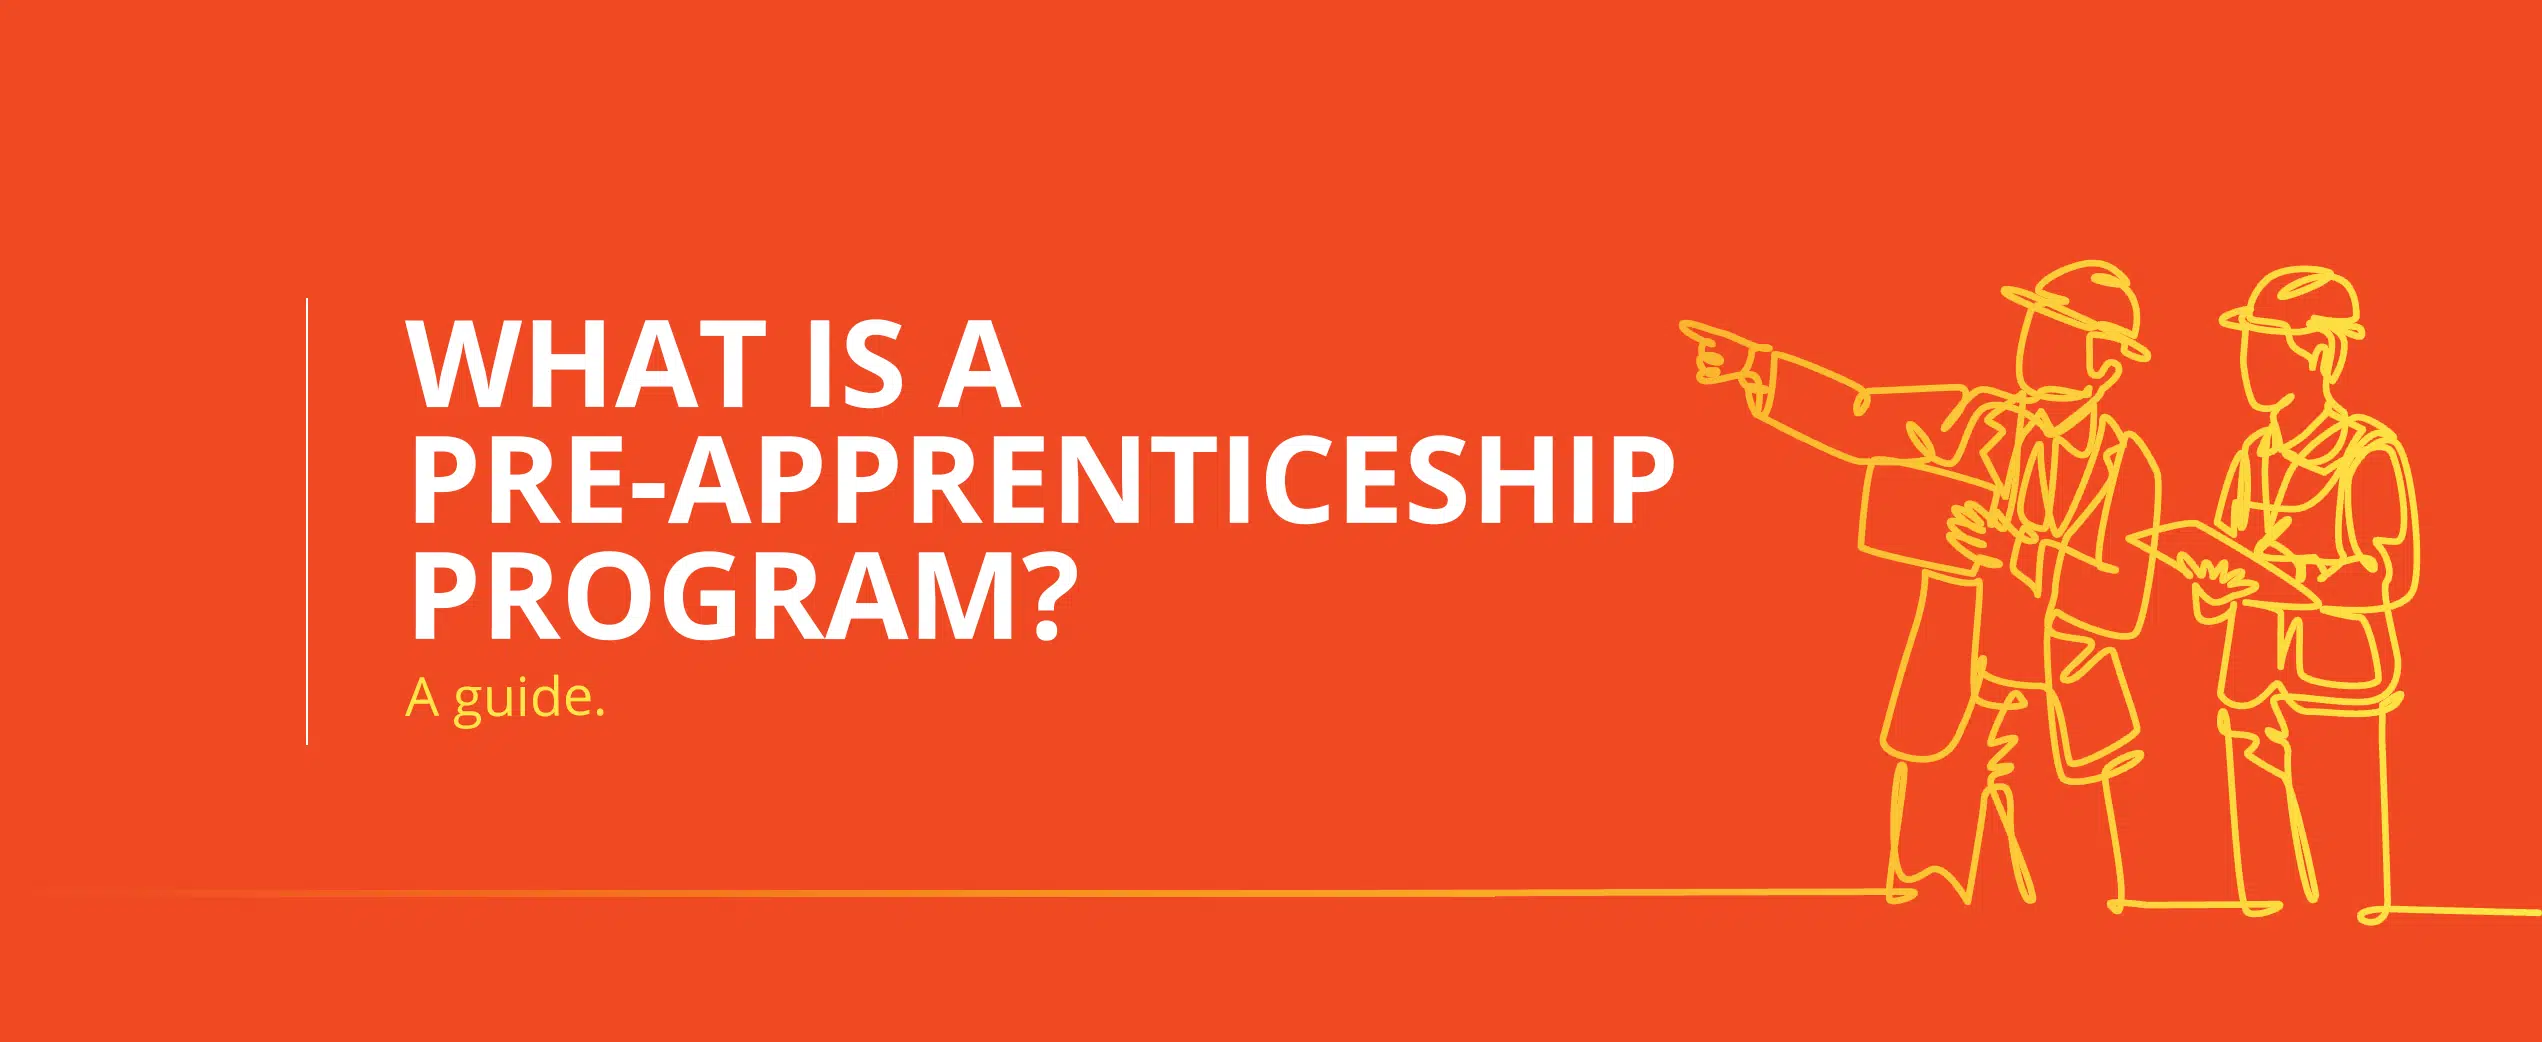 What is a pre-apprenticeship program? A guide.